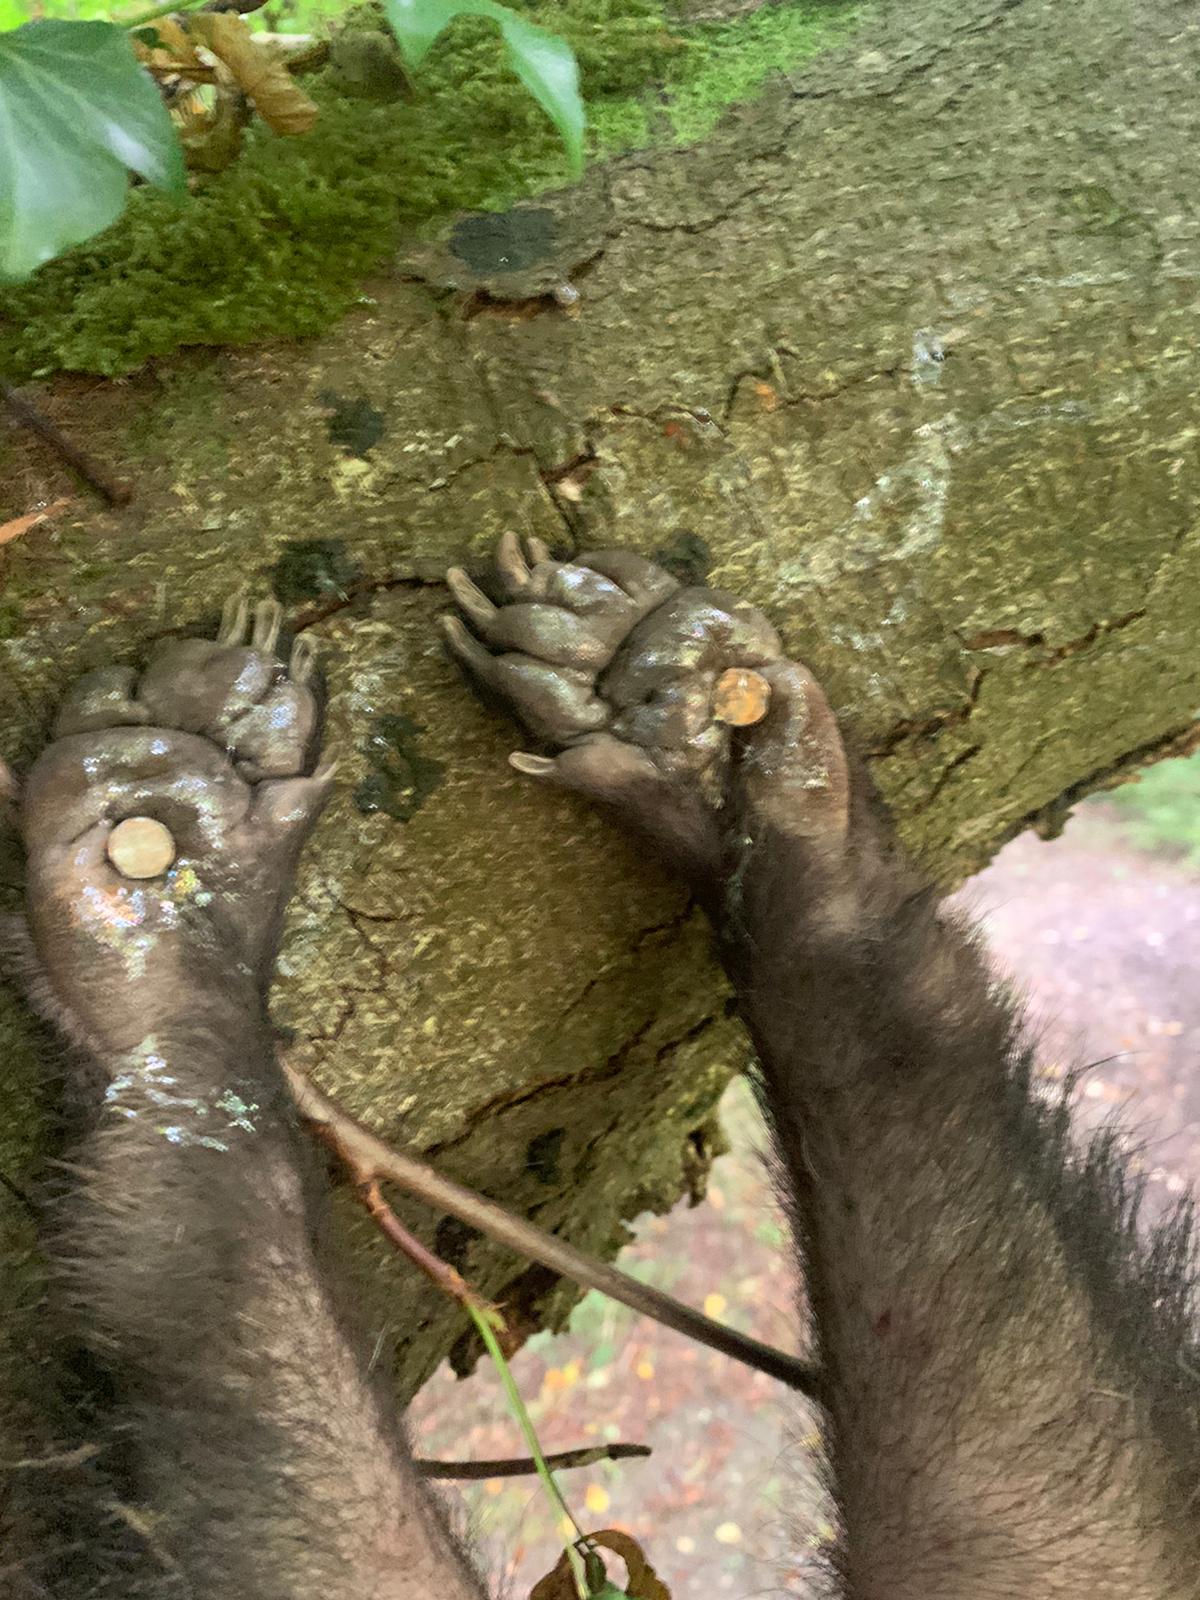 A disturbing image released by the force shows two nails pinning the animal’s feet to a branch